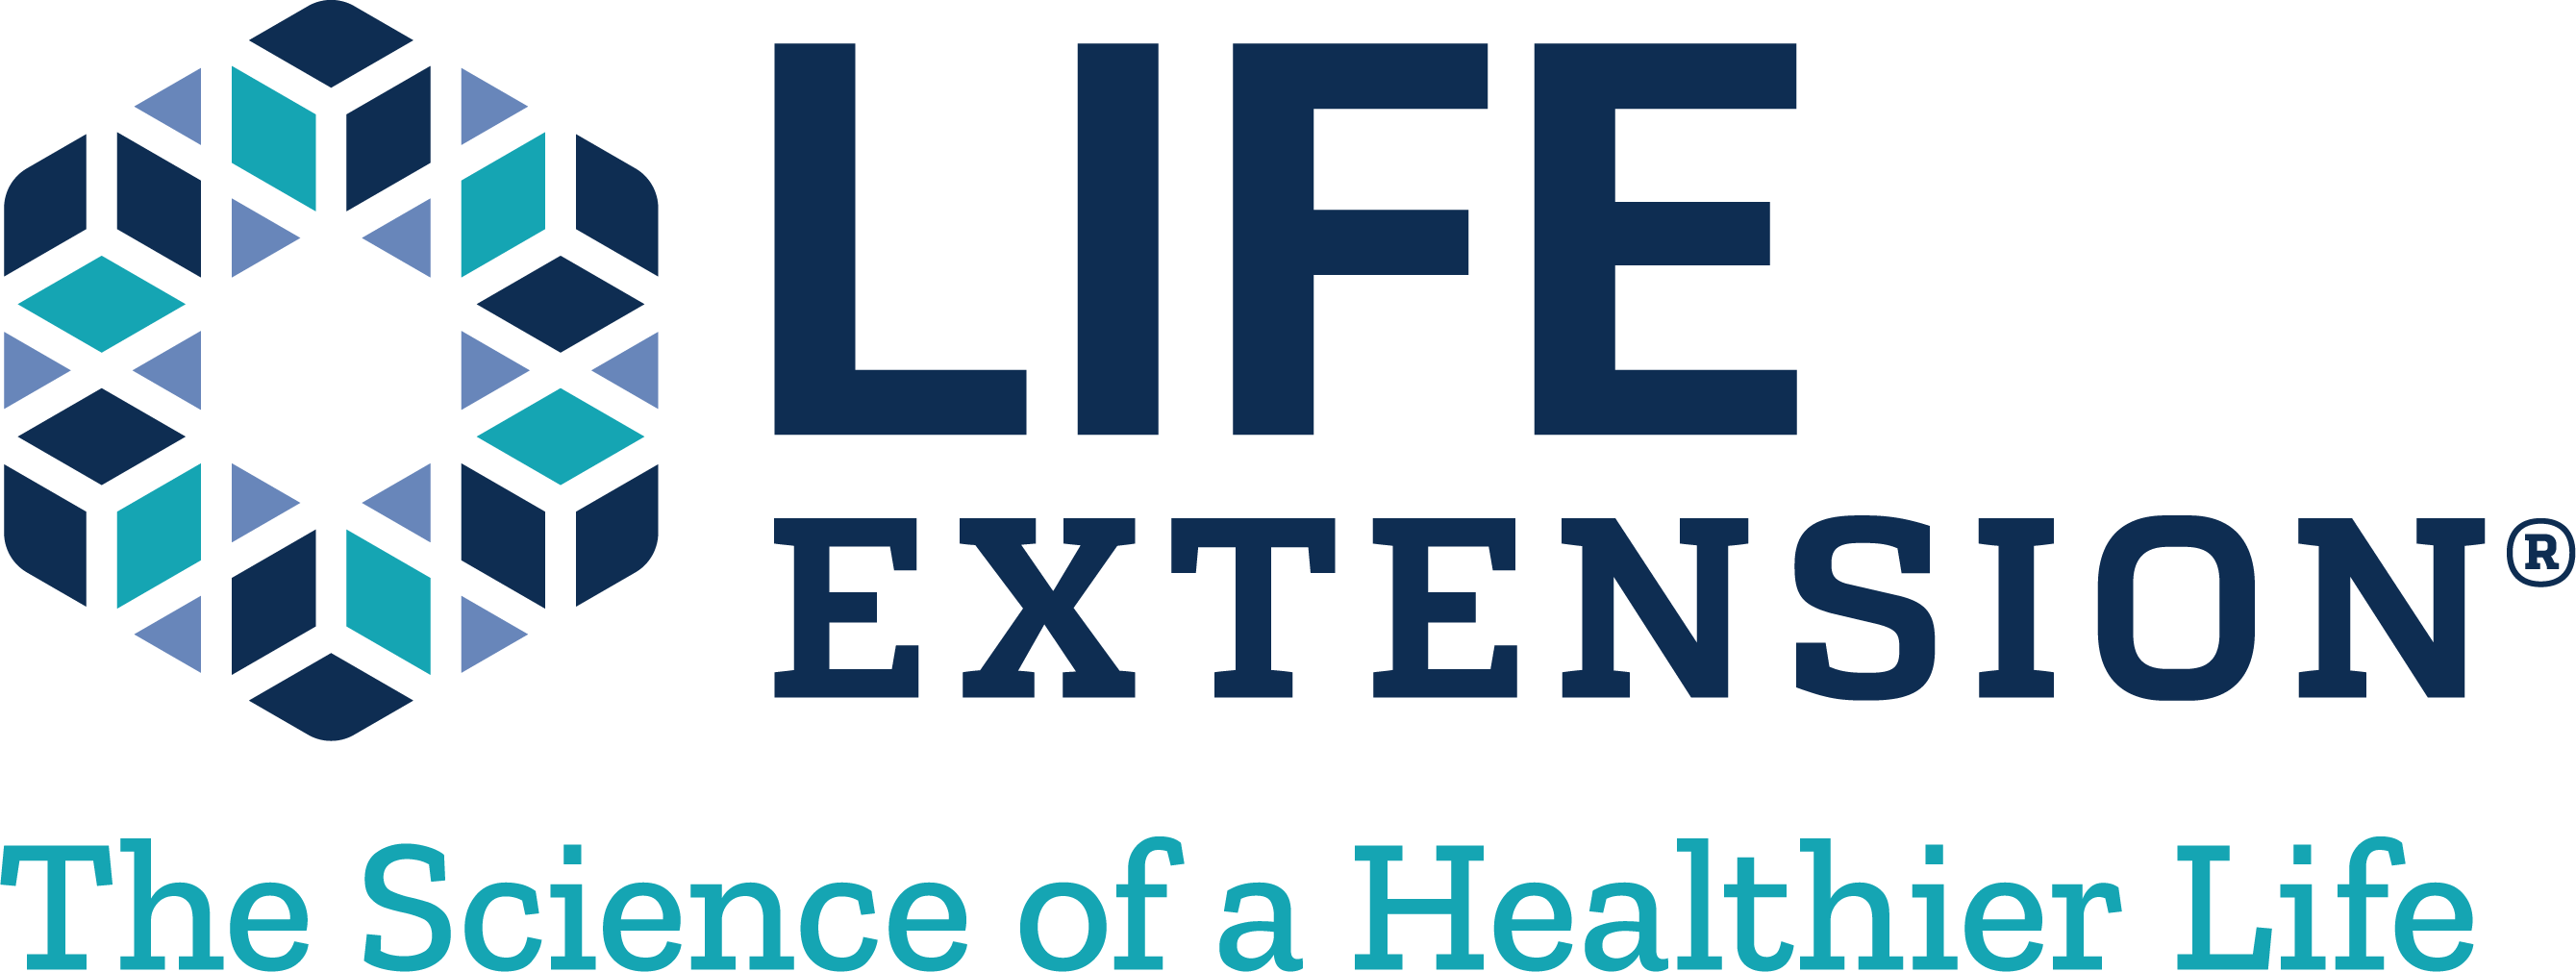 Life Extension®
The Science of a Healthier Life
www.LifeExtension.com